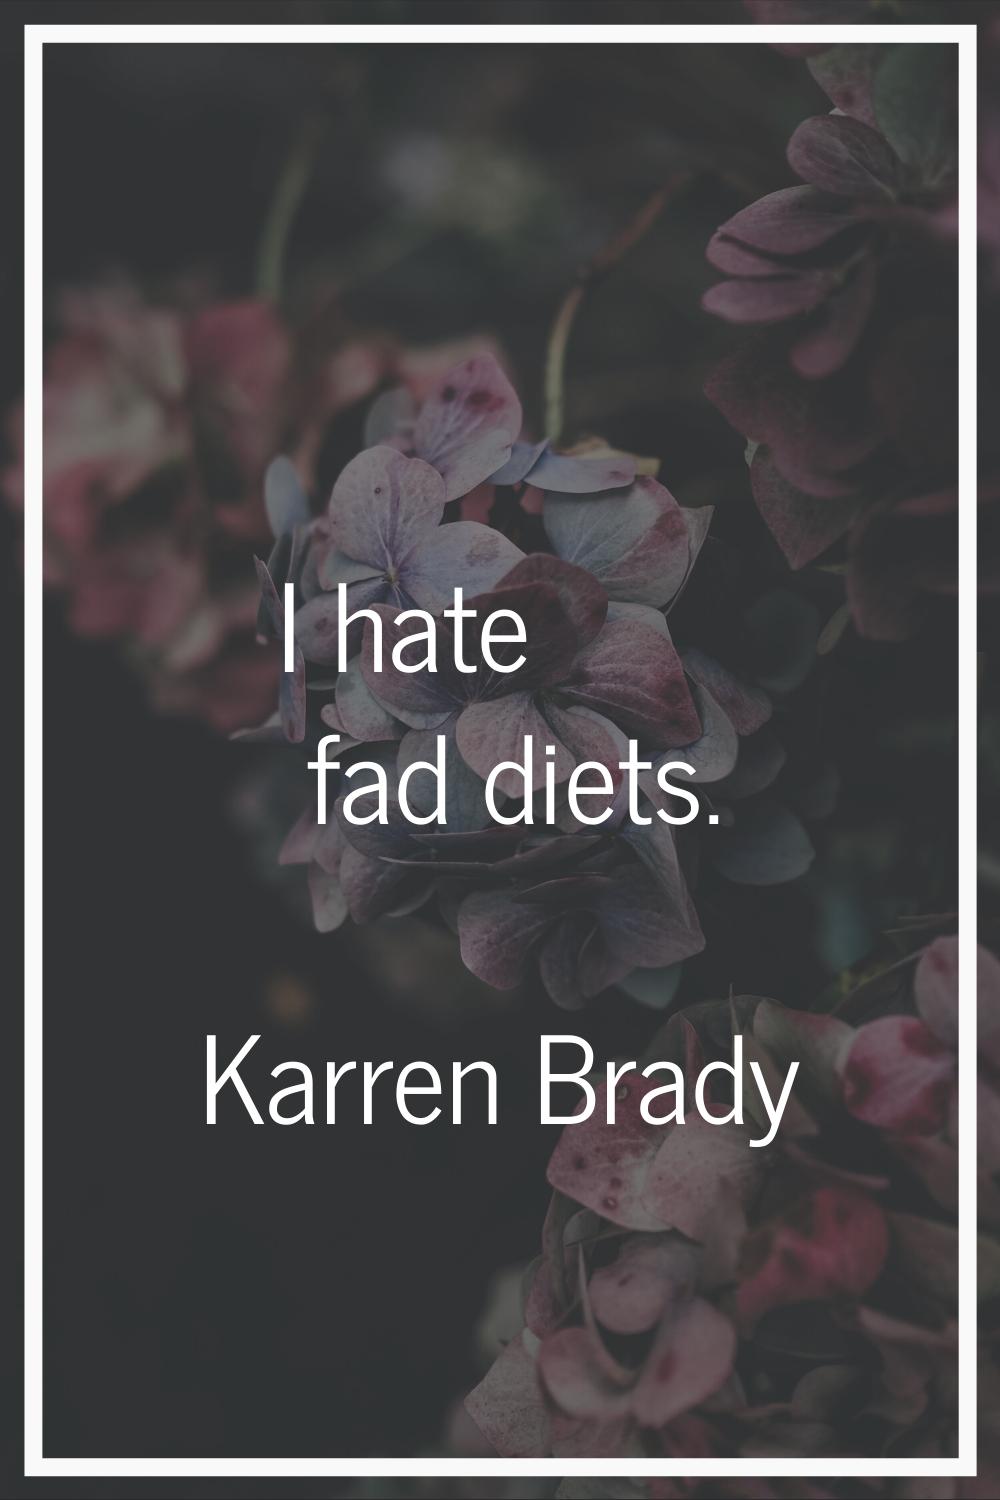 I hate fad diets.